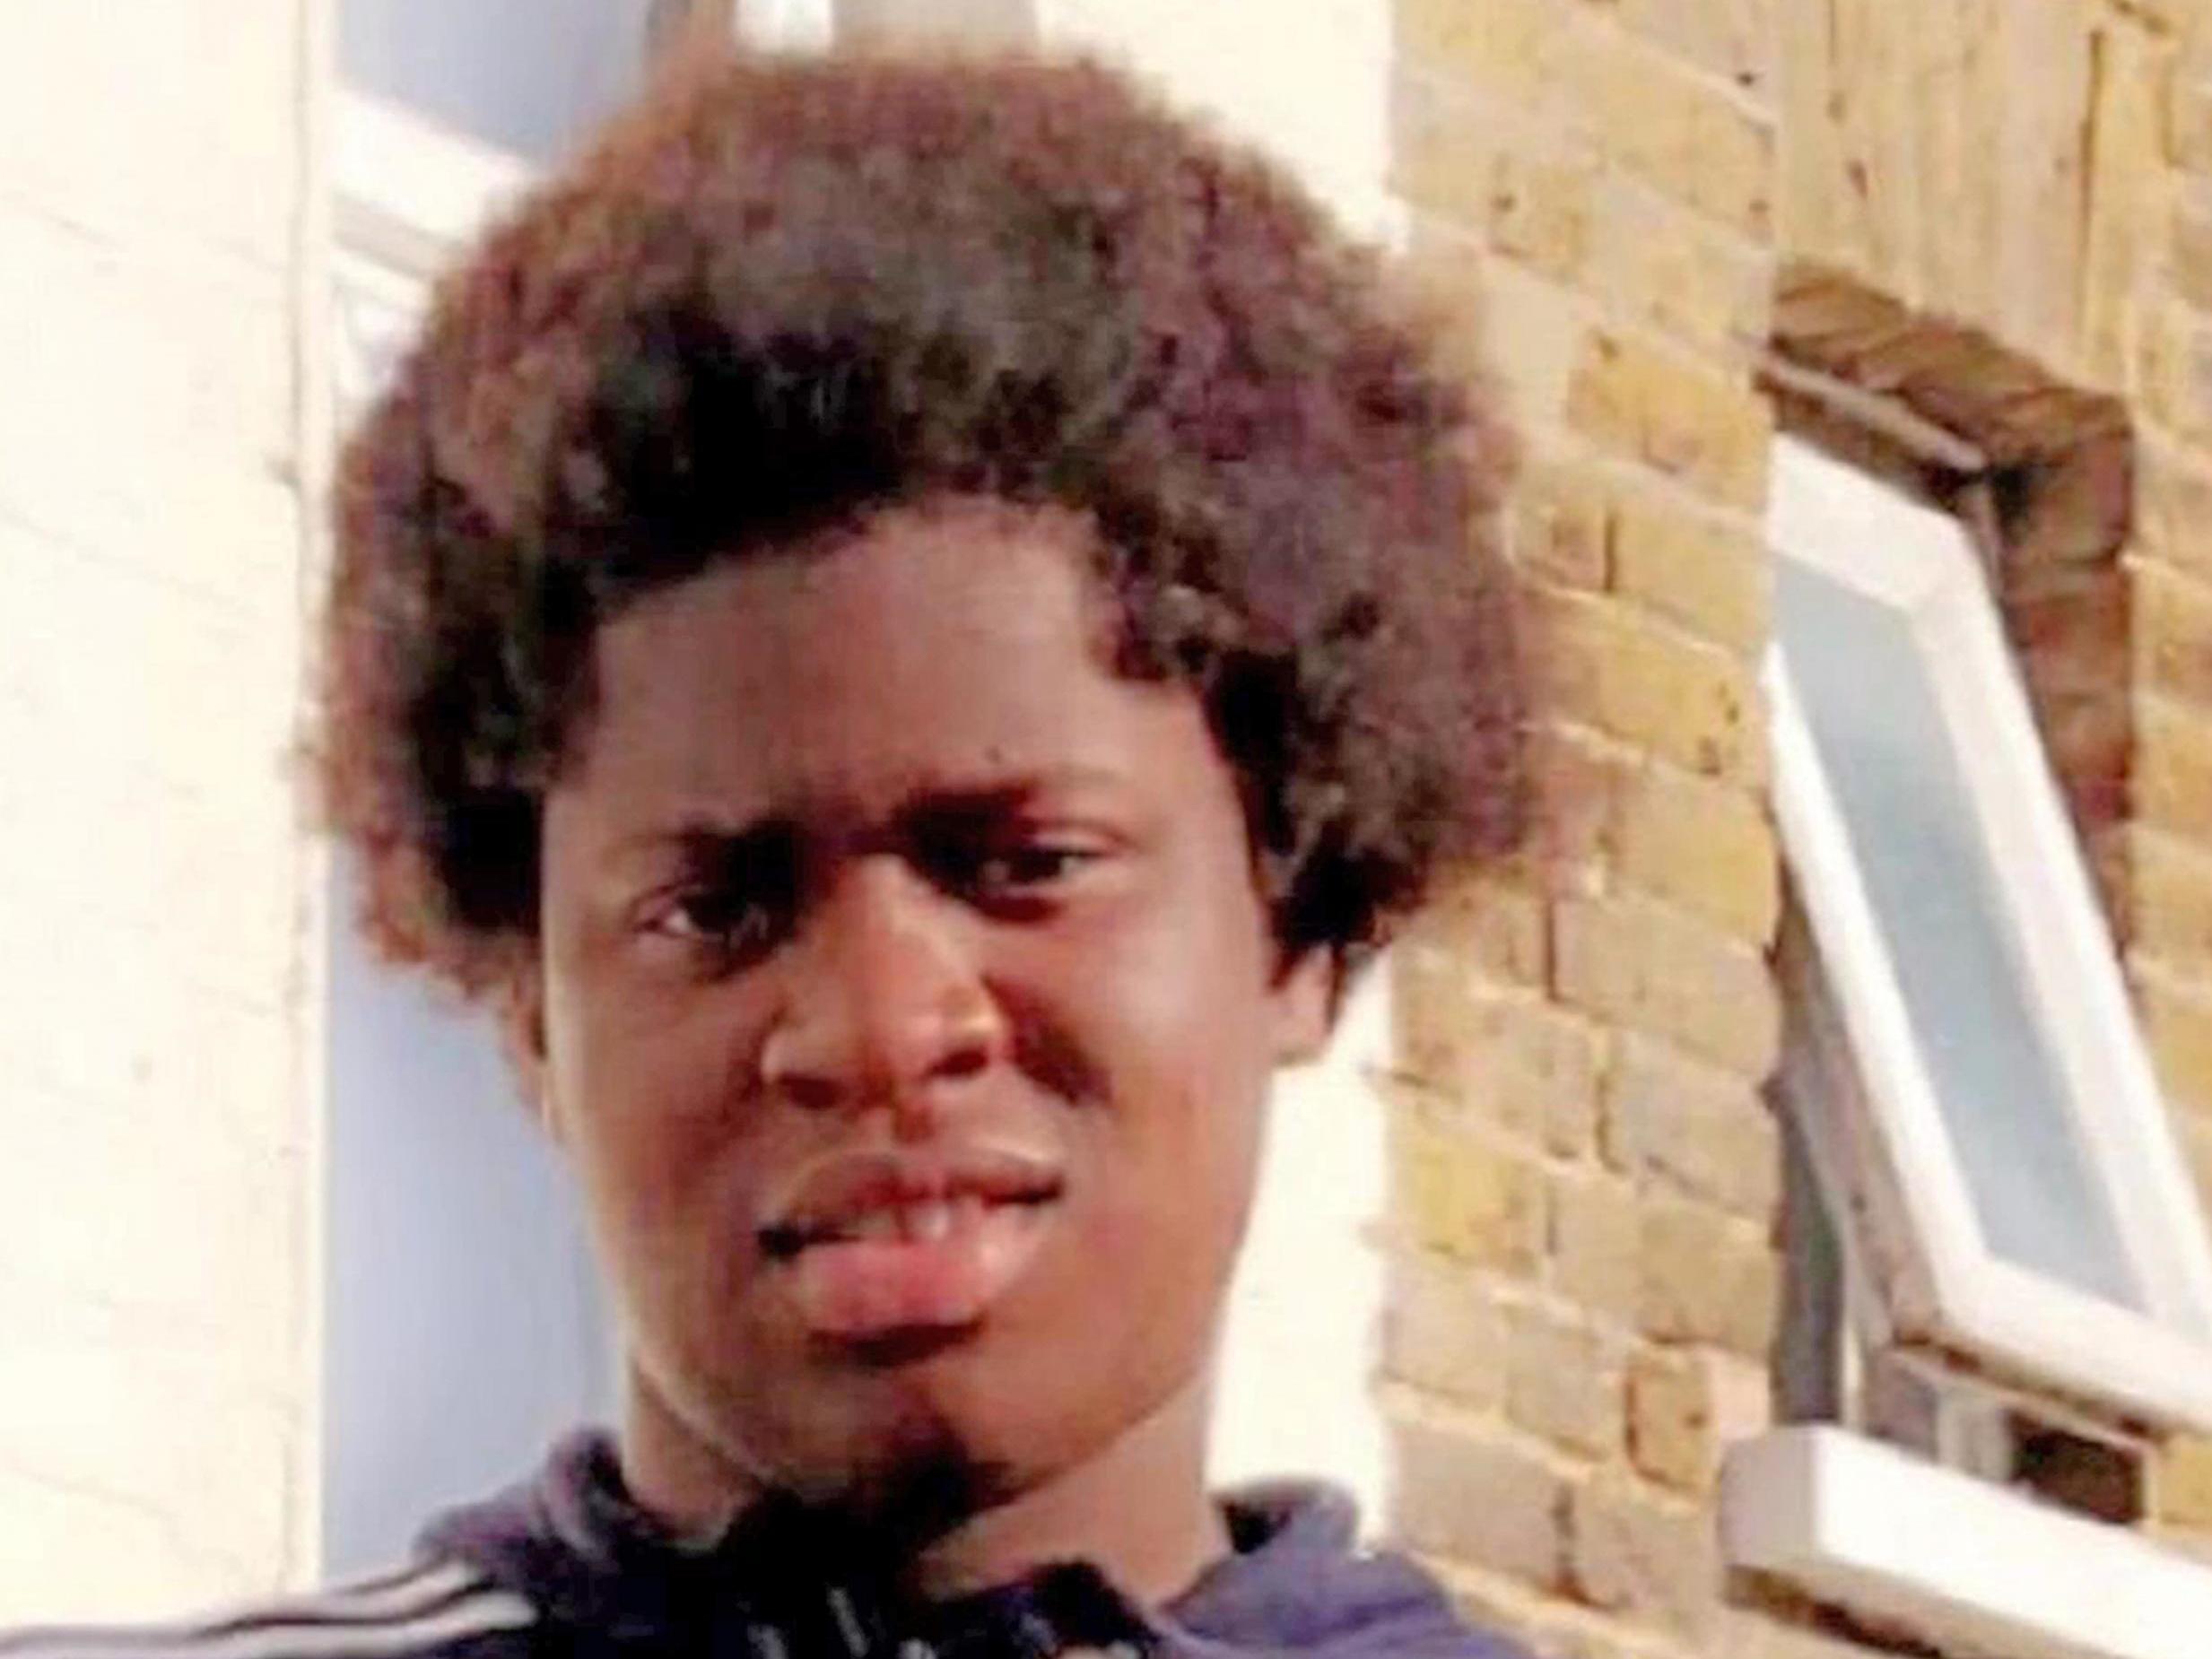 Amara Toure, 18, was fatally stabbed outside a home in Walworth, south east London, in the early hours of Sunday, June 30.